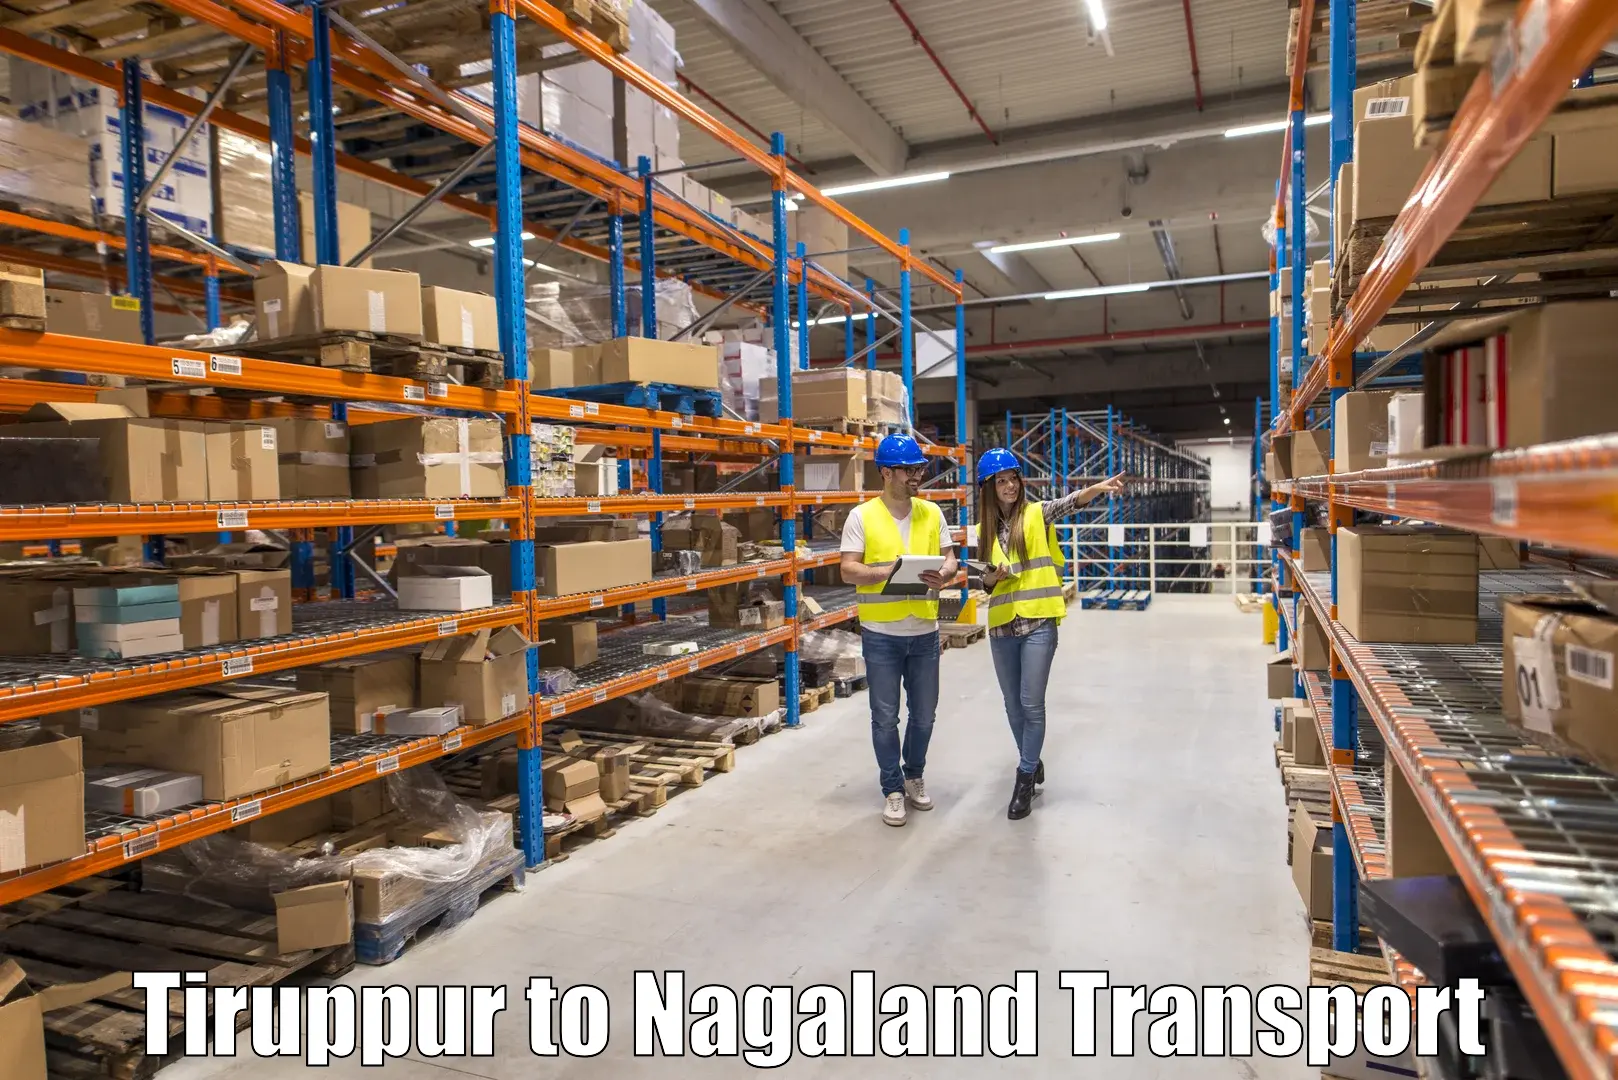 Goods delivery service Tiruppur to Mokokchung